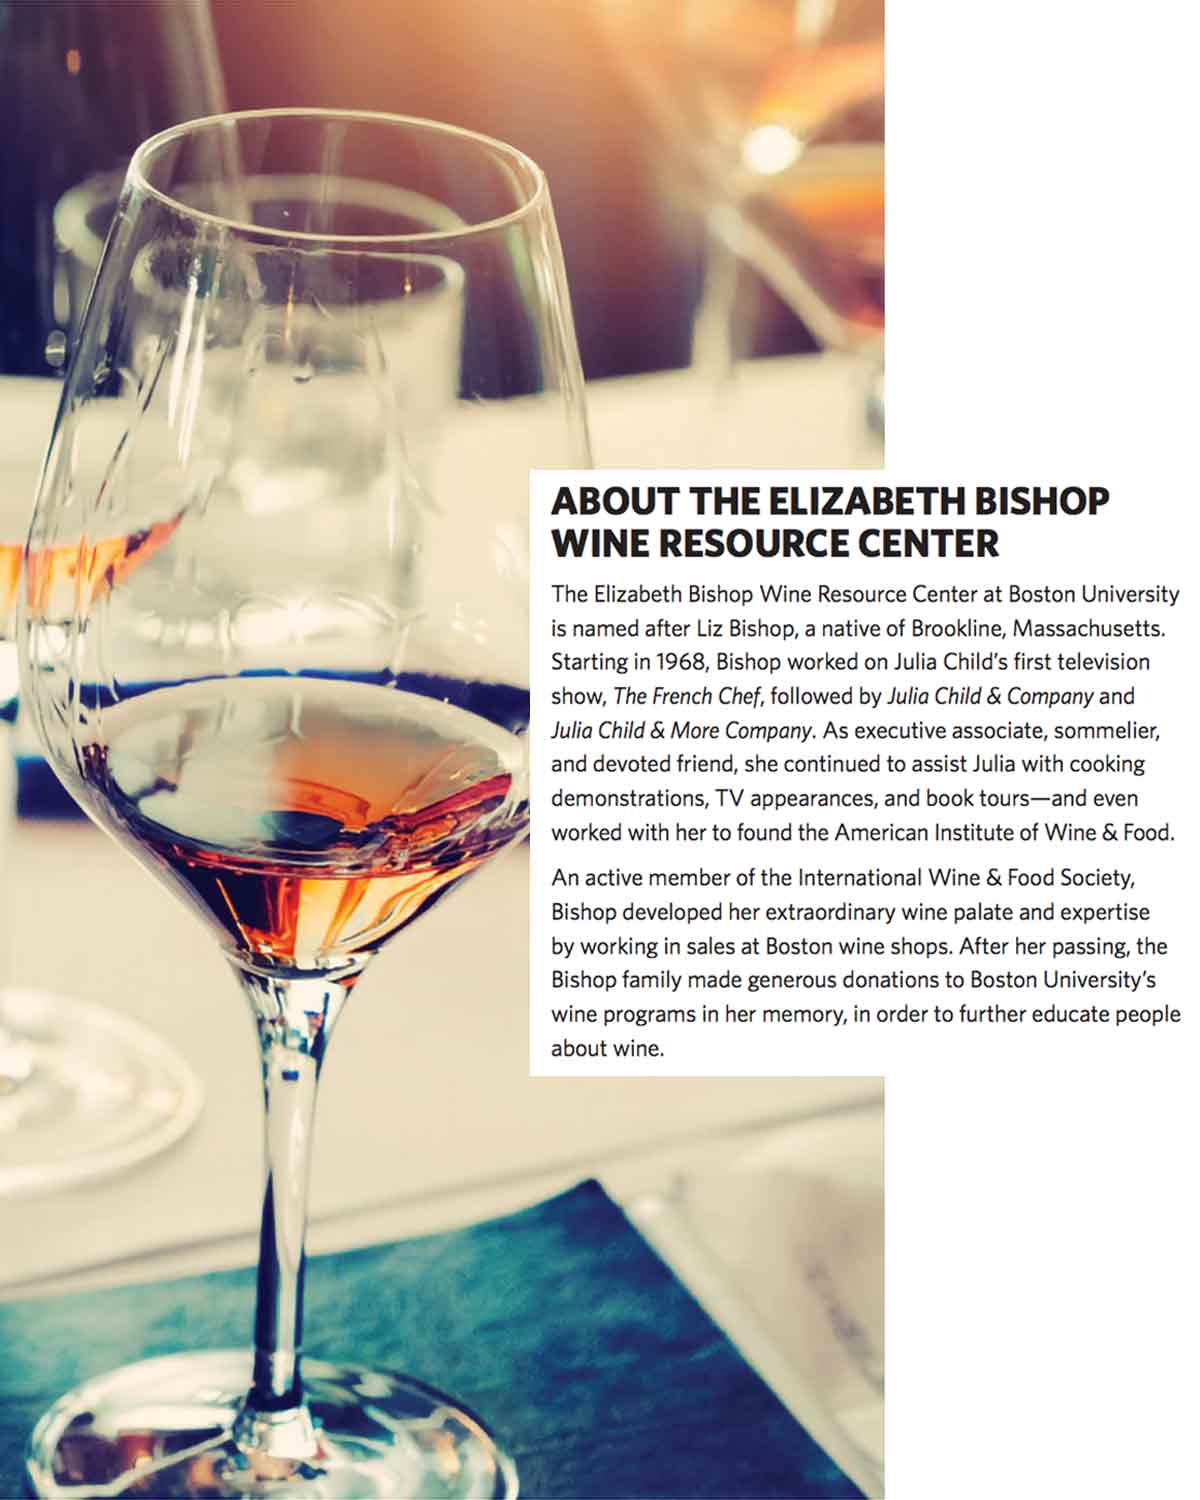 An image of a glass of wine and a text box explaining what the Elizabeth Bishop wine resource center is.